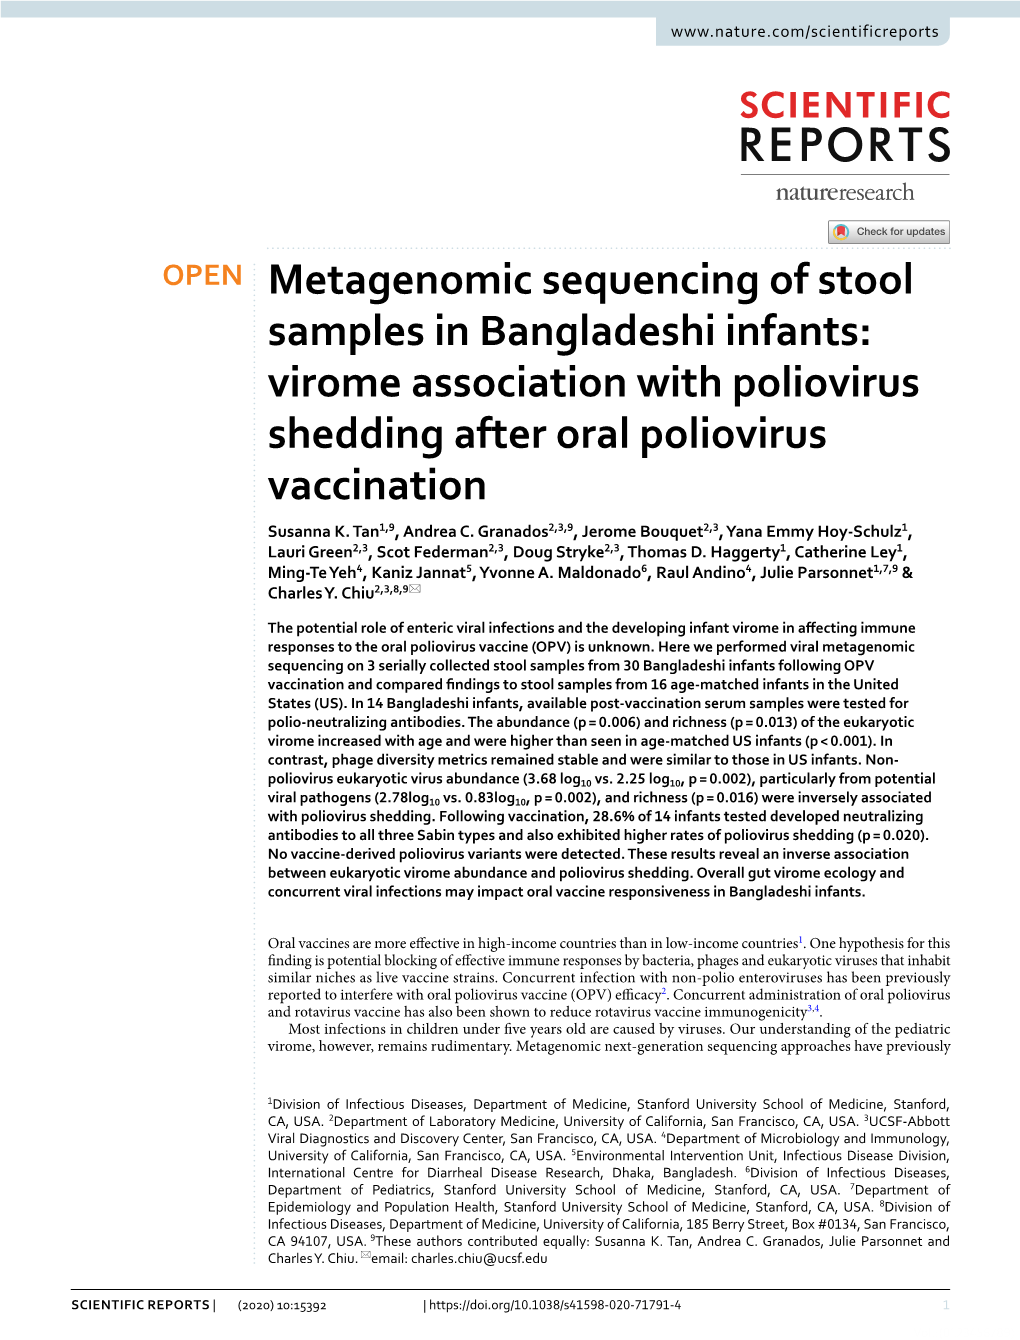 Metagenomic Sequencing of Stool Samples in Bangladeshi Infants: Virome Association with Poliovirus Shedding After Oral Poliovirus Vaccination Susanna K